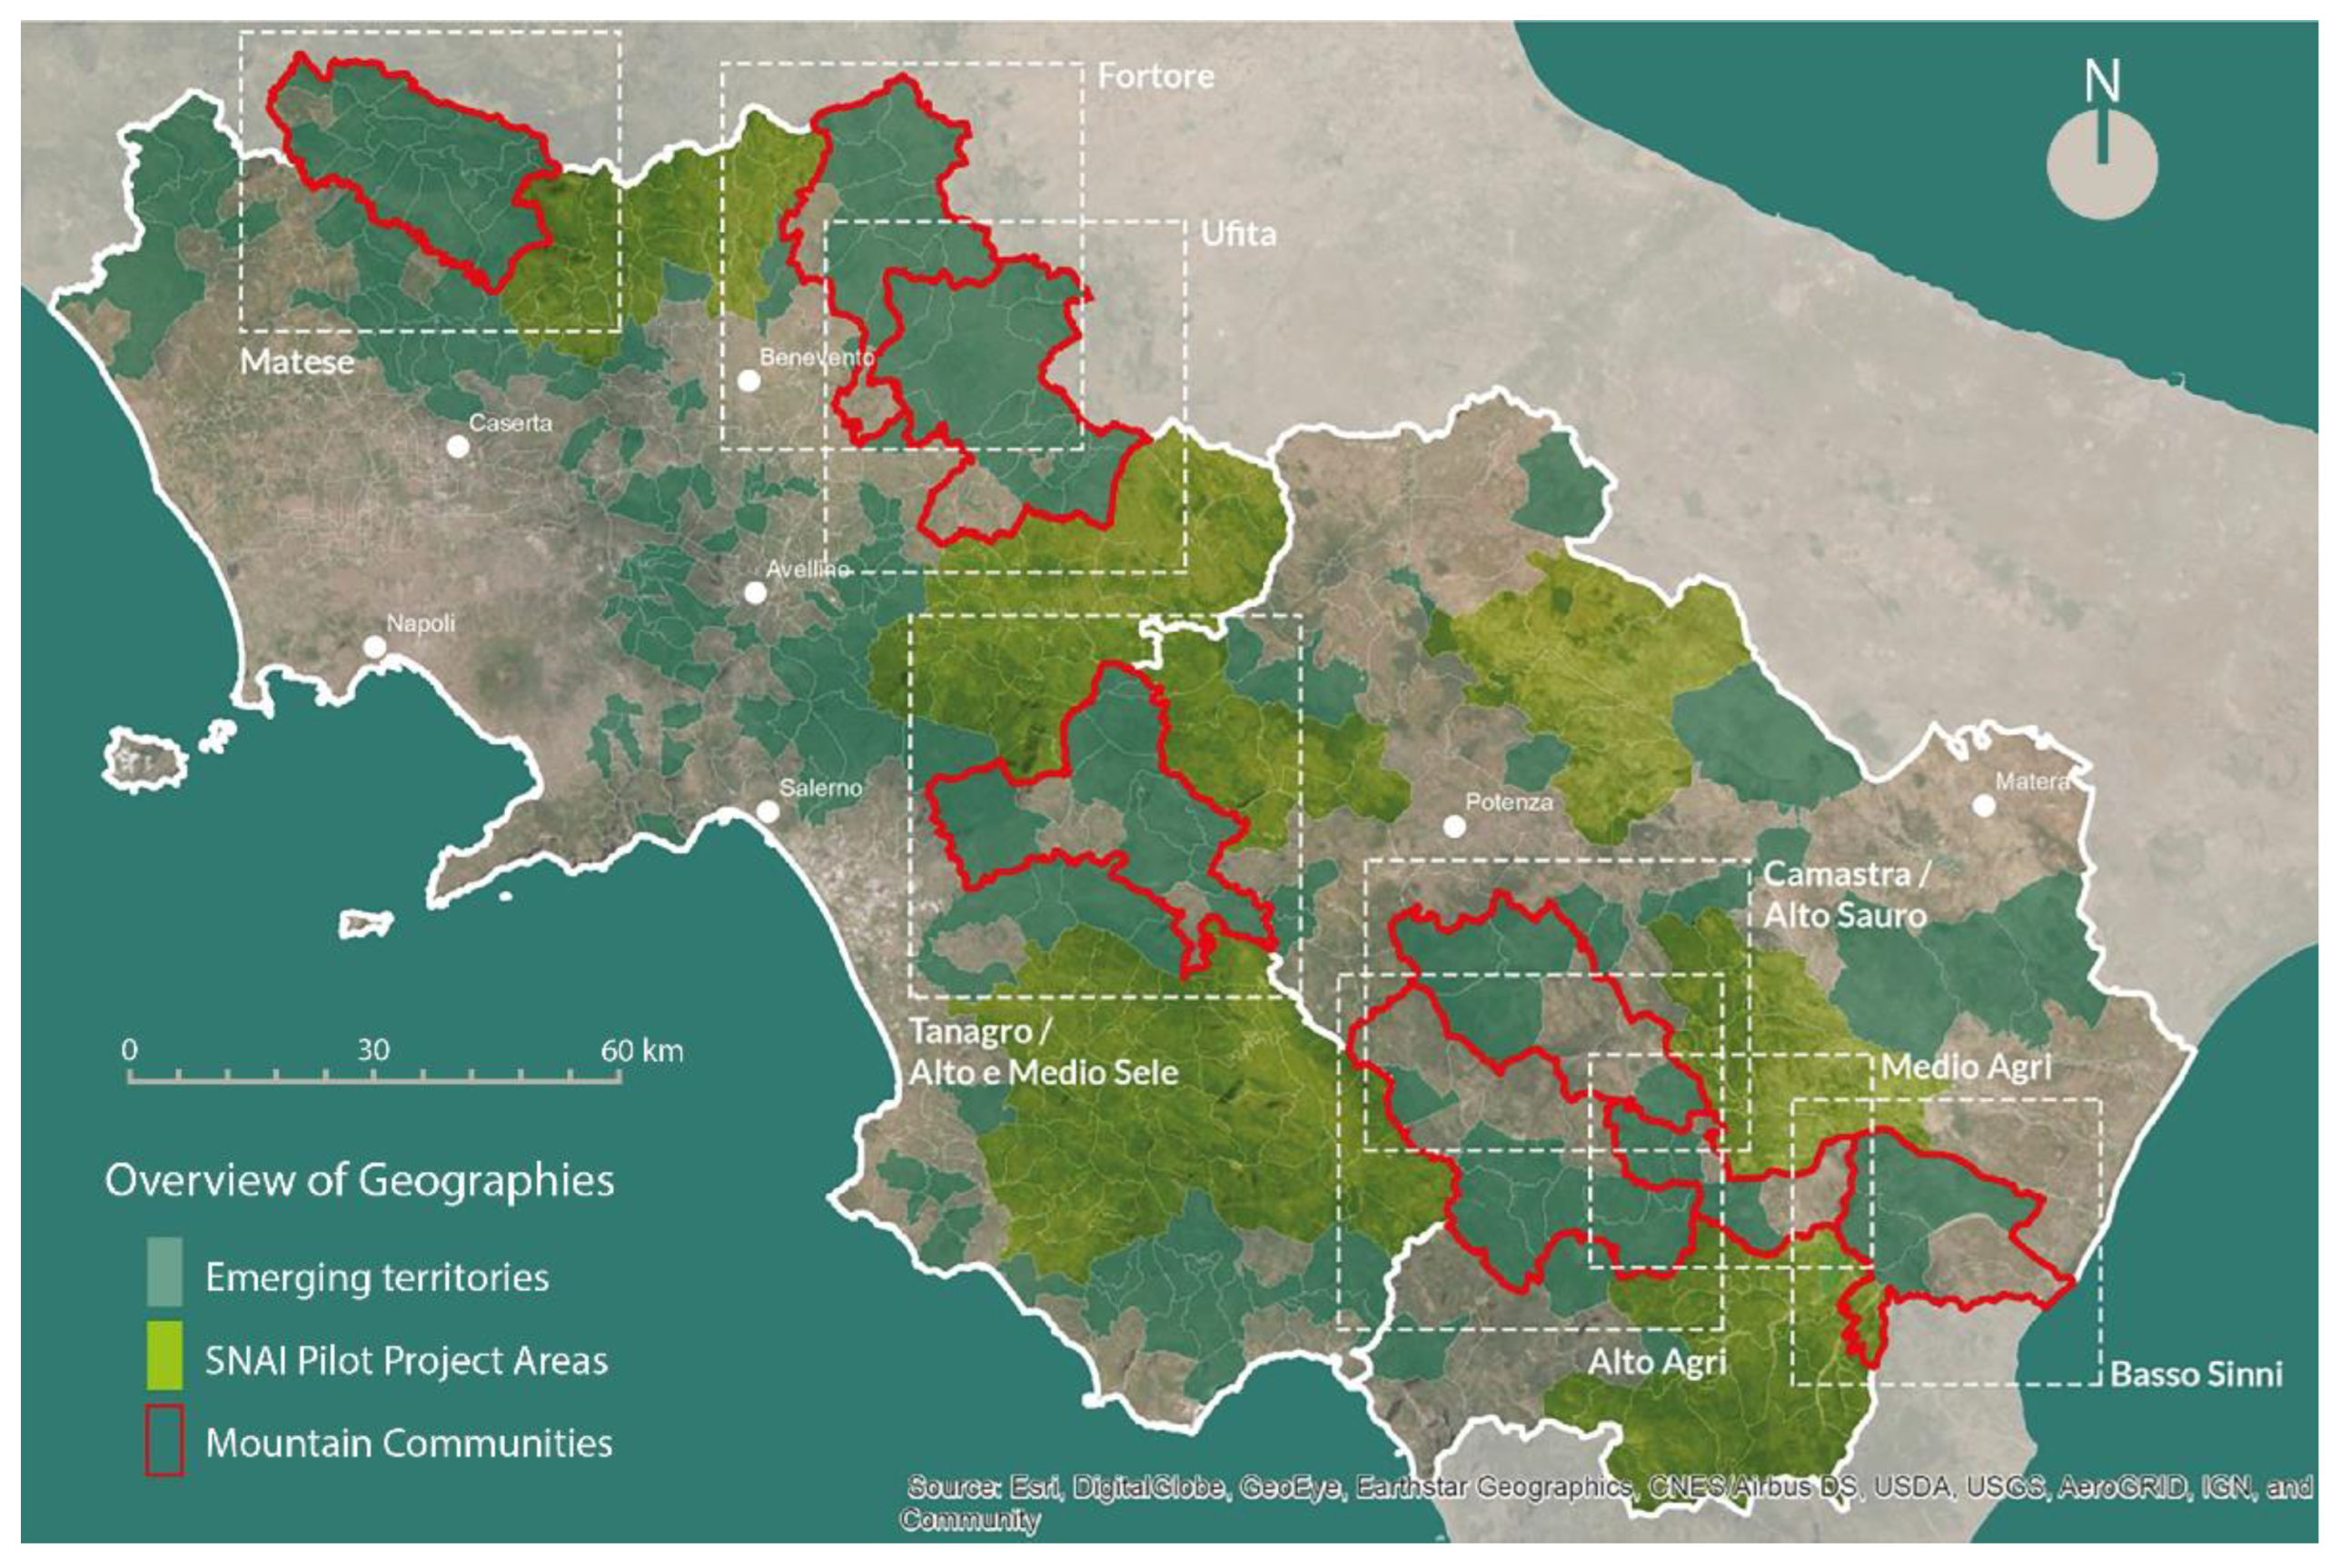 Buildings | Free Full-Text | The RI.P.R.O.VA.RE. Project for the  Regeneration of Inland Areas: A Focus on the Ufita Area in the Campania  Region (Italy)